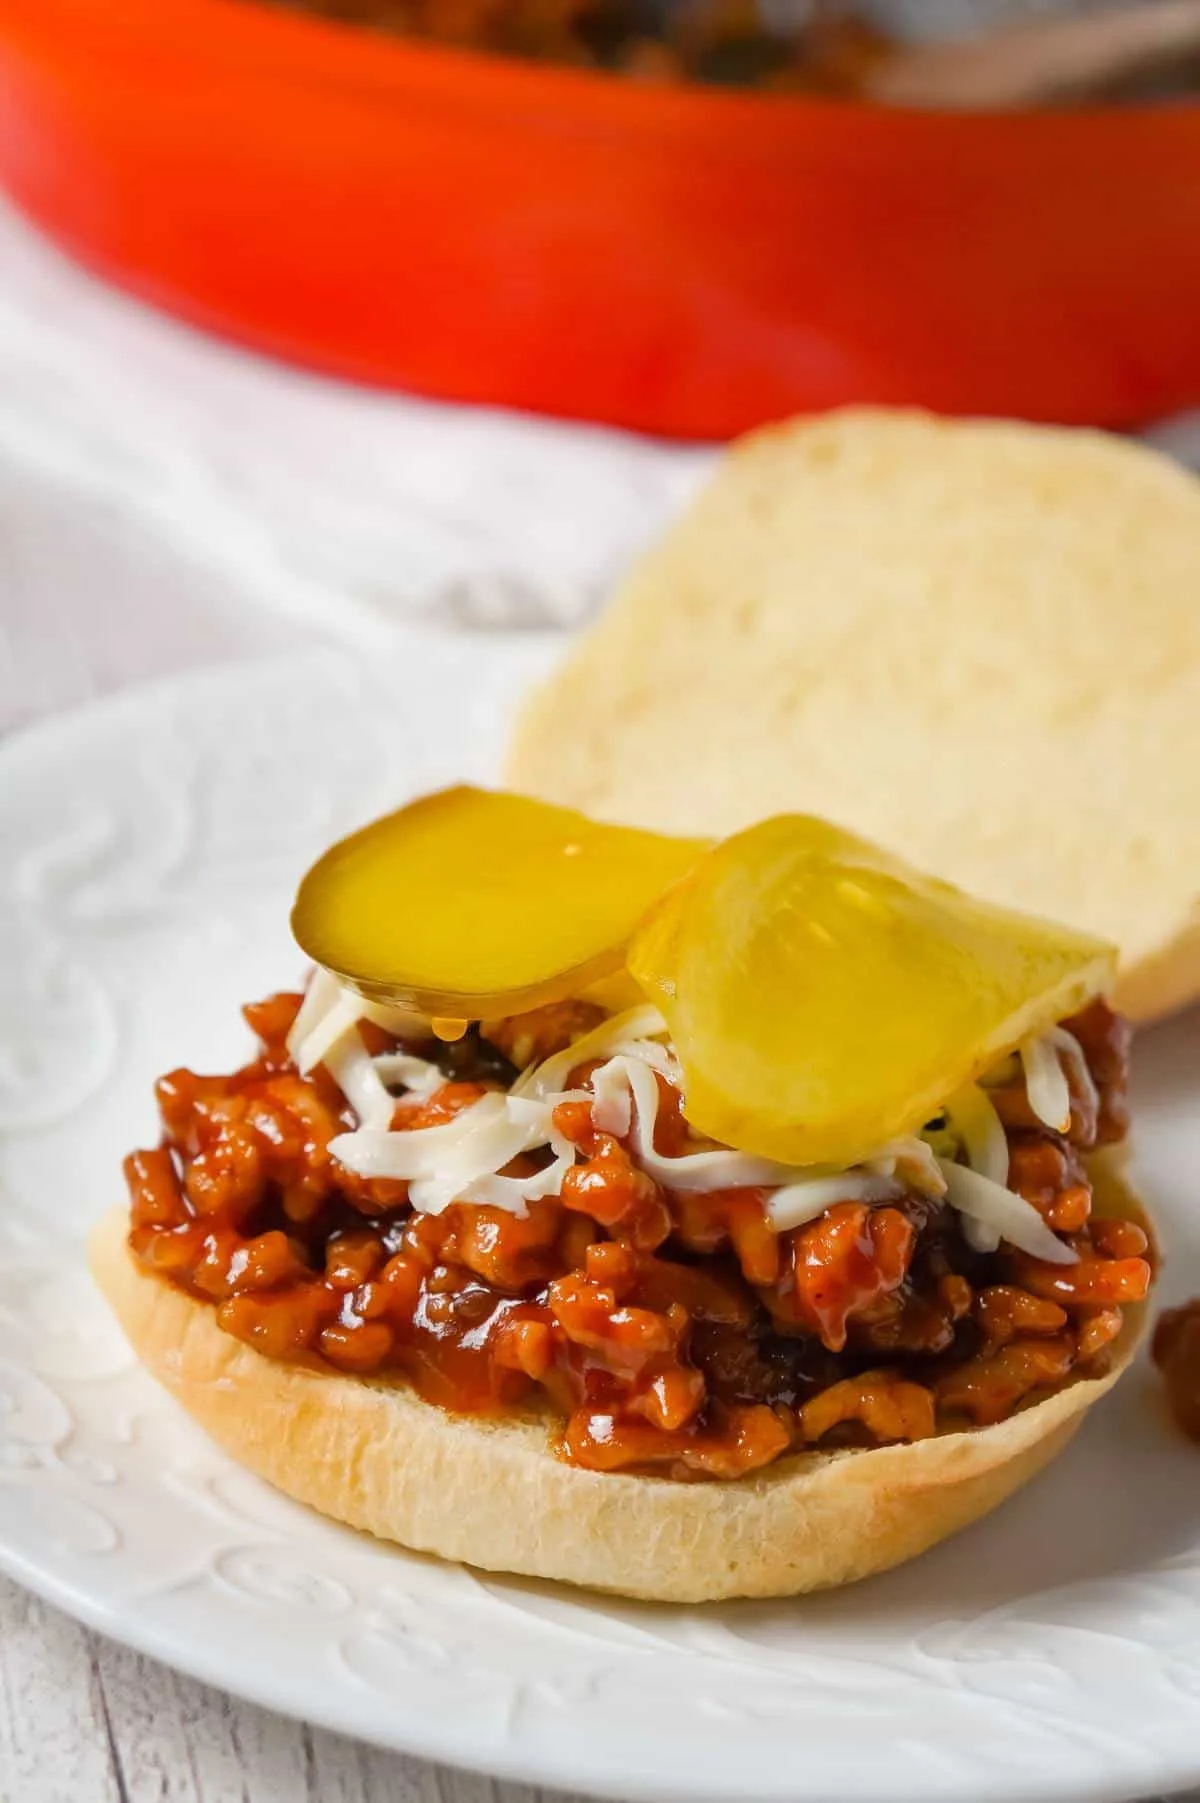 Honey BBQ Chicken Sloppy Joes are an easy weeknight dinner recipe using ground chicken, tossed in honey and BBQ sauce and topped with mozzarella cheese and dill pickles.